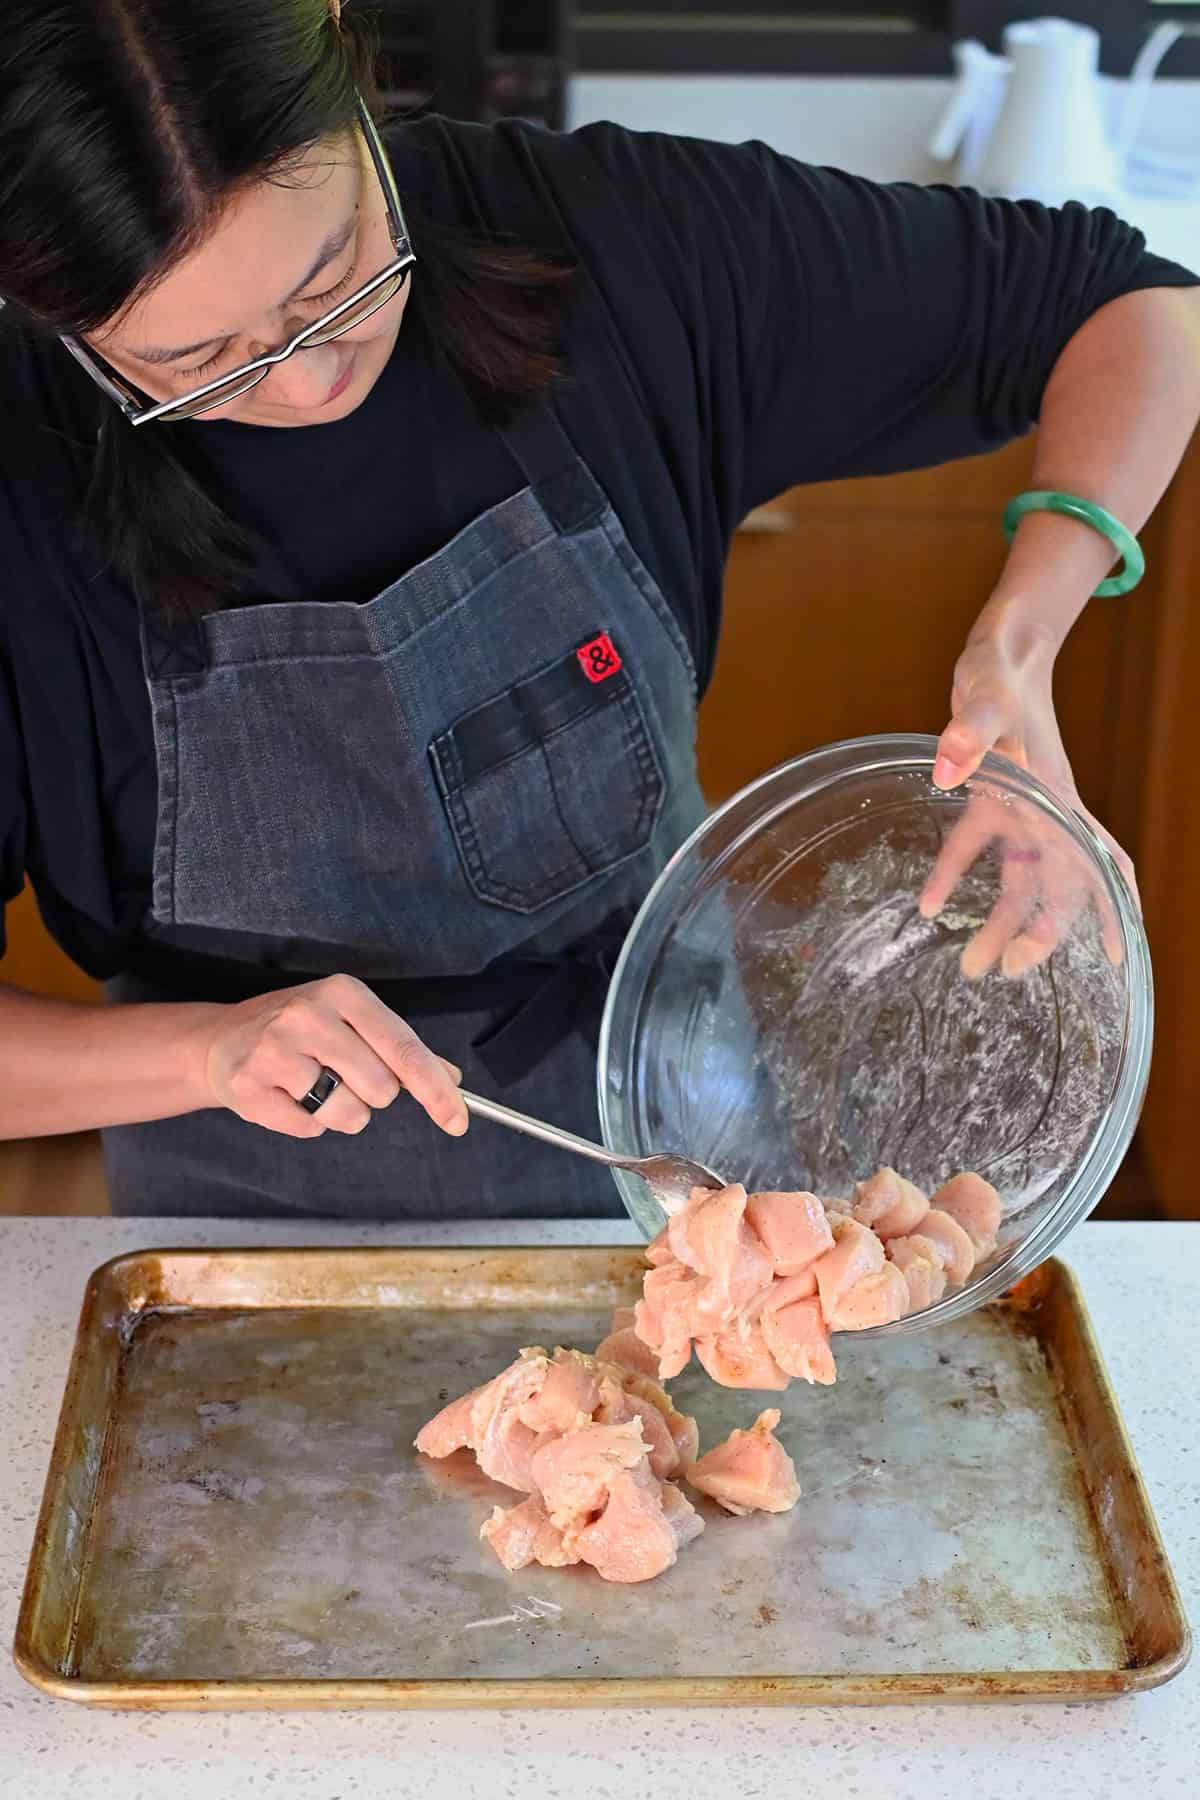 An Asian woman is adding seasoned raw chicken breast cubes to a greased rimmed baking sheet.